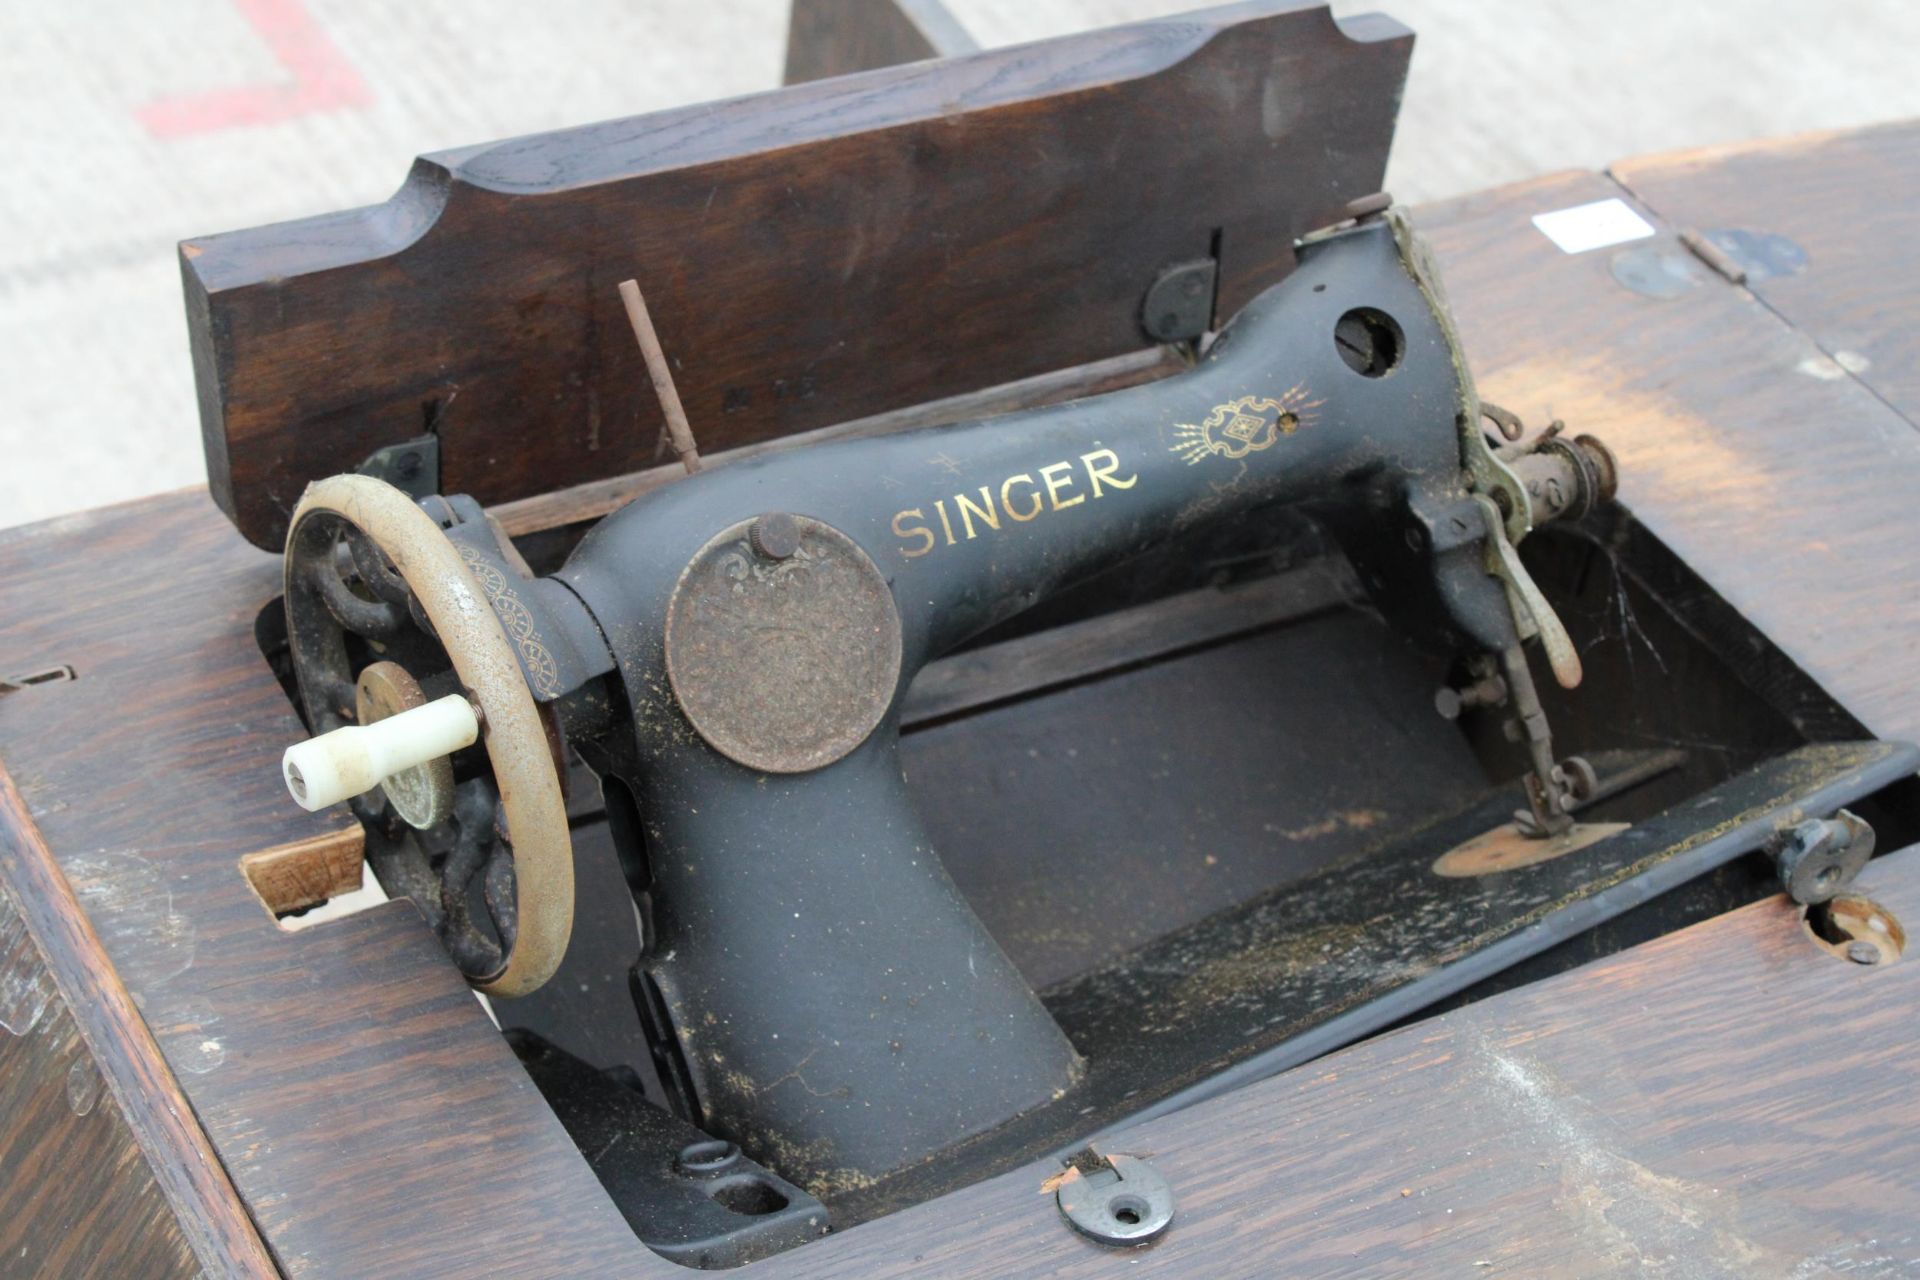 A VINTAGE SINGER SEWING MACHINE WITH WOODEN WORK TABLE - Image 2 of 3